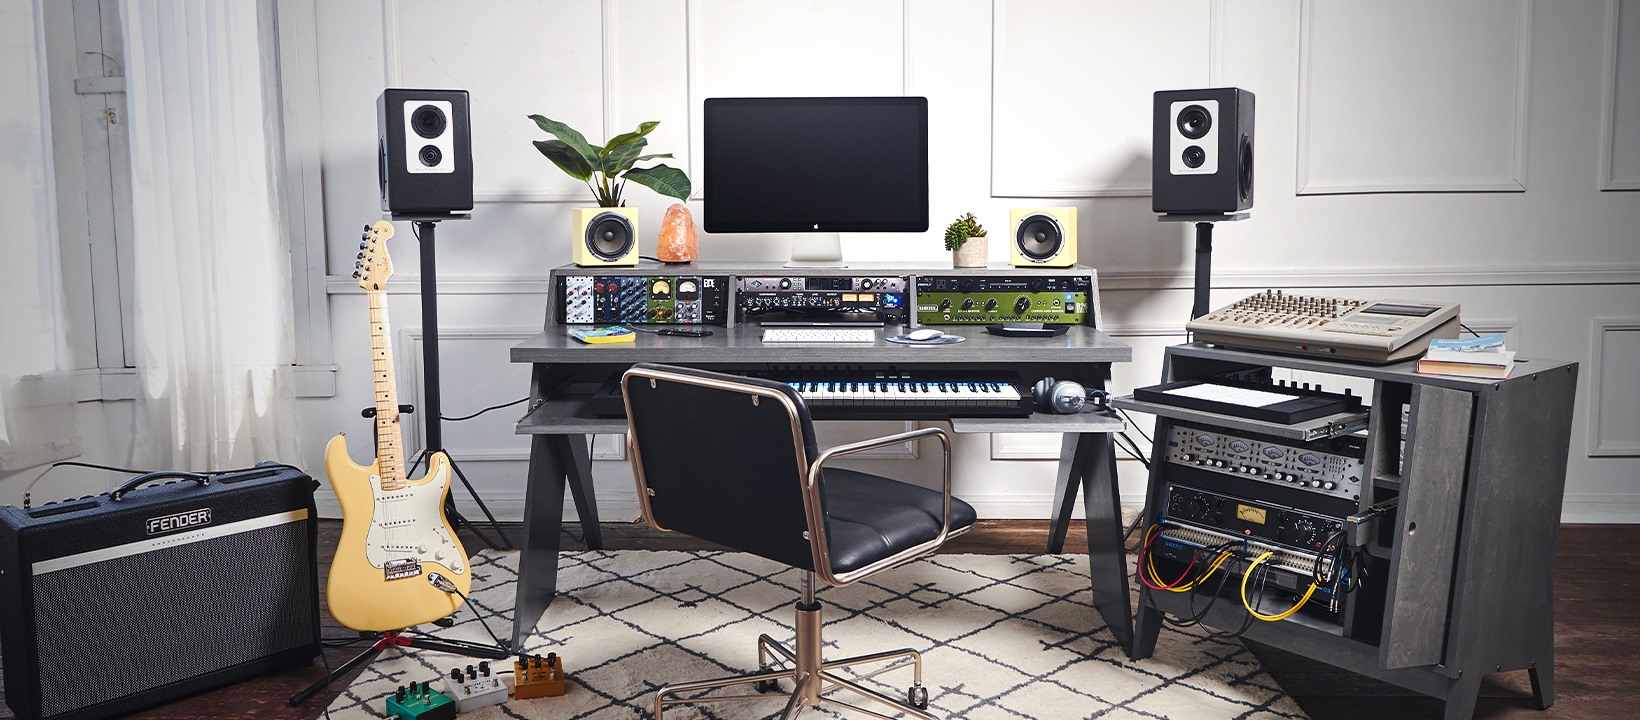 Output raise $45m to make instruments, music tech, and even furniture for musicians